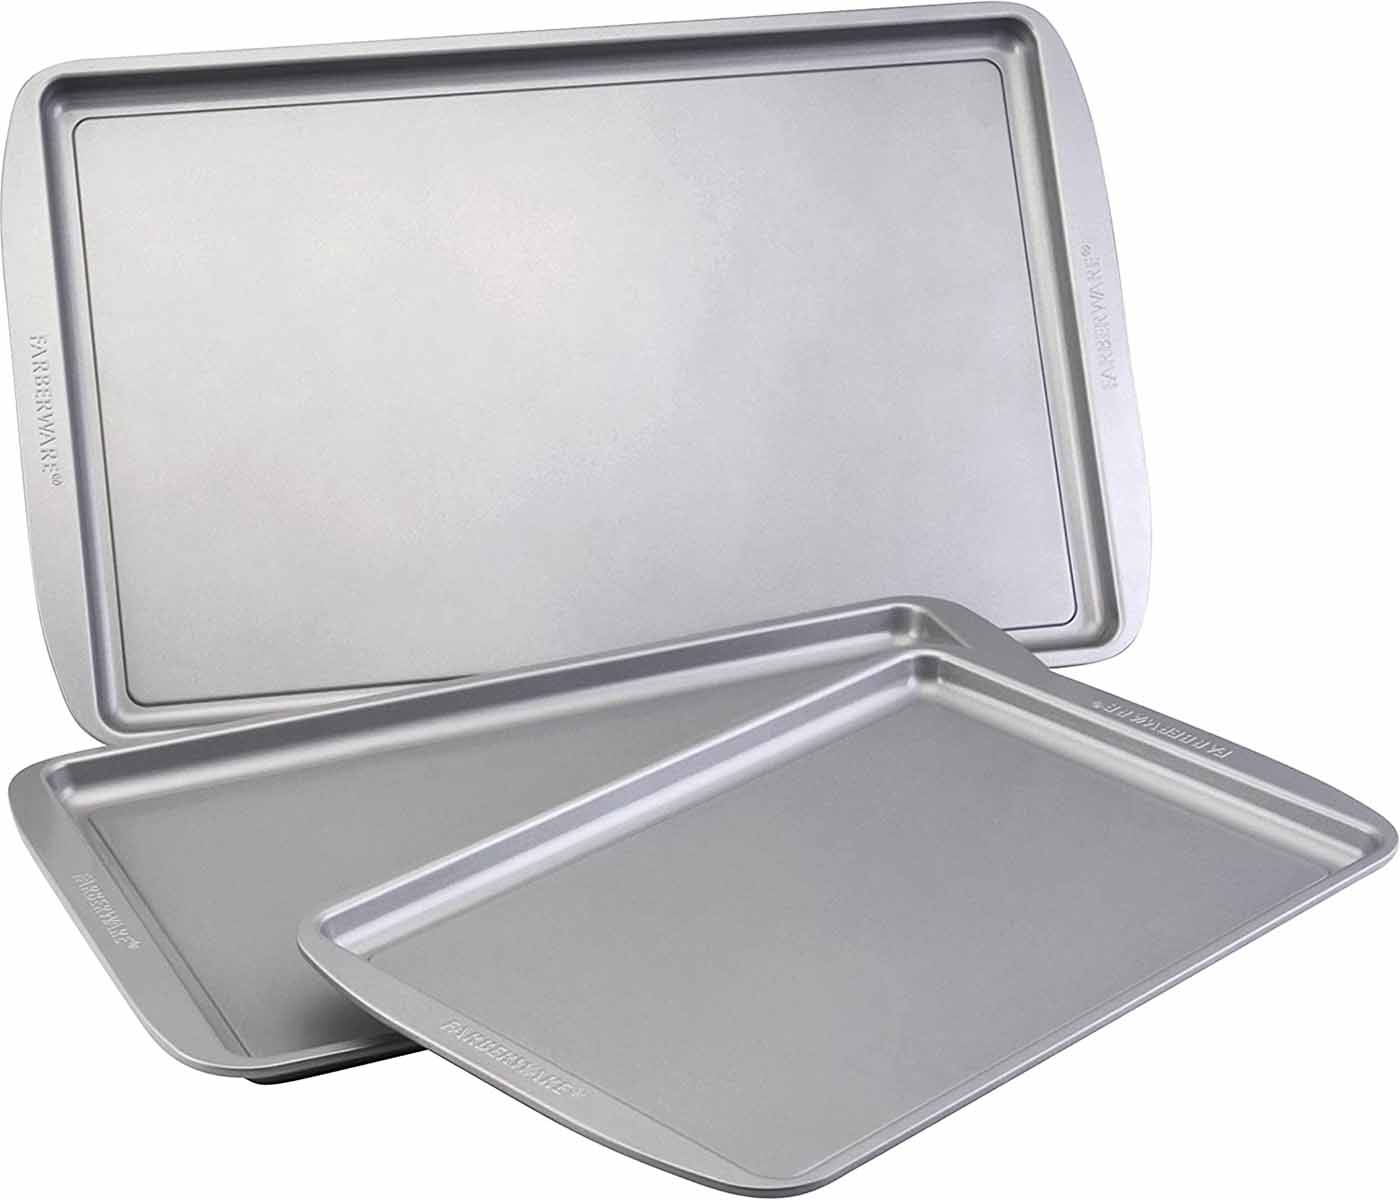 Steel Chef Select Cookie Sheets Serving 15x10 Set of 3 13x9 and 17x11 Non-Stick Great for Baking Roasting 